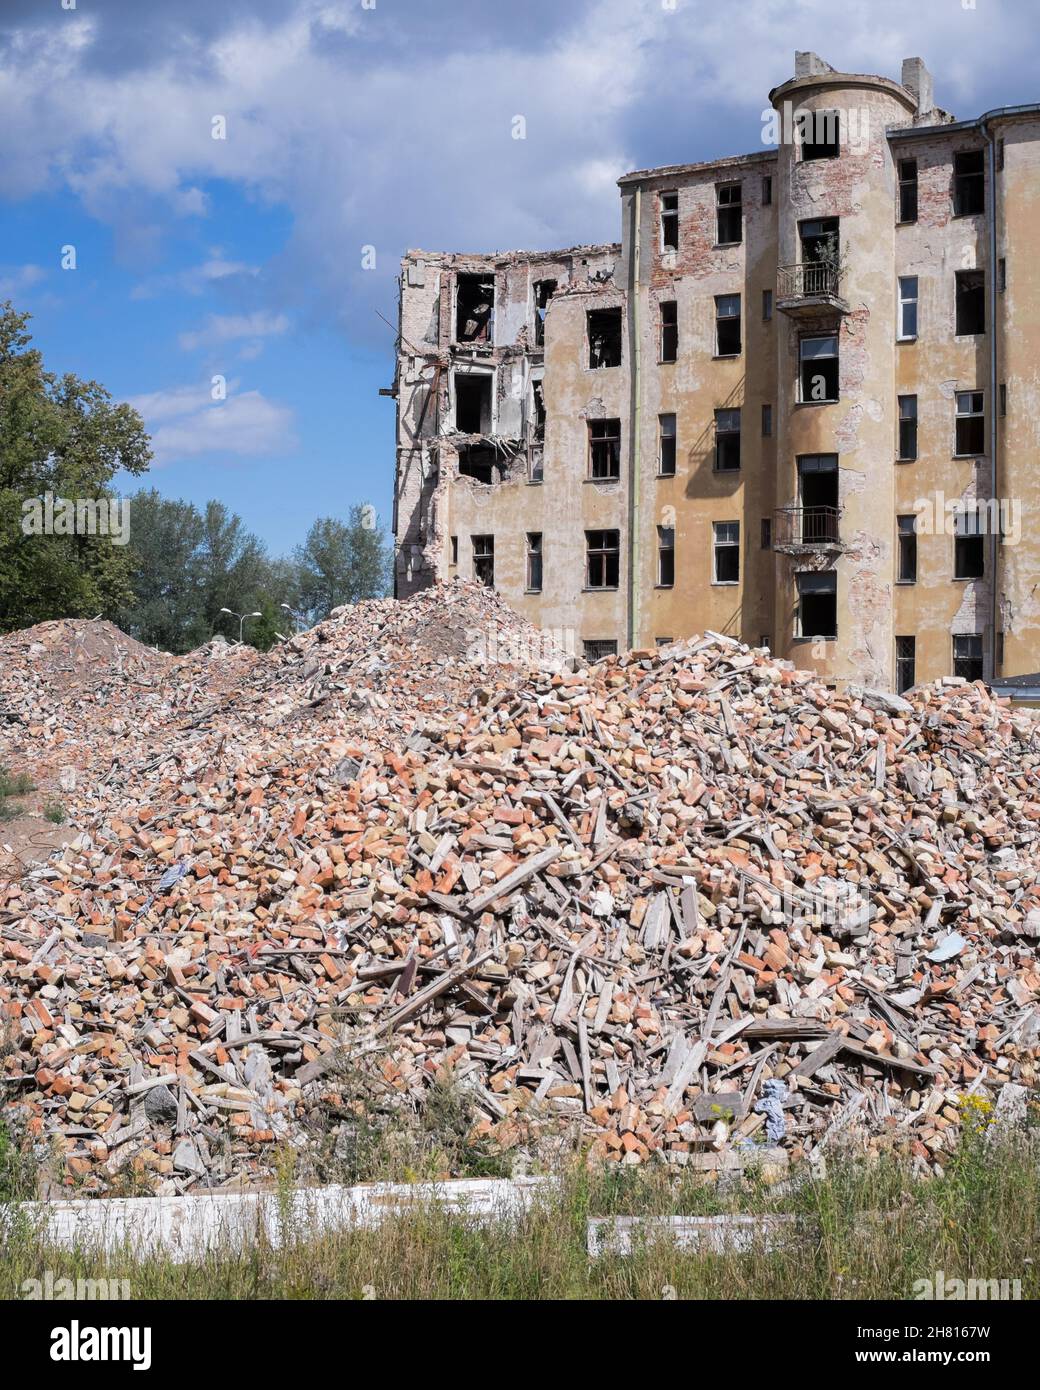 An old building before demolition with a pile of rubble in the foreground Riga Stock Photo